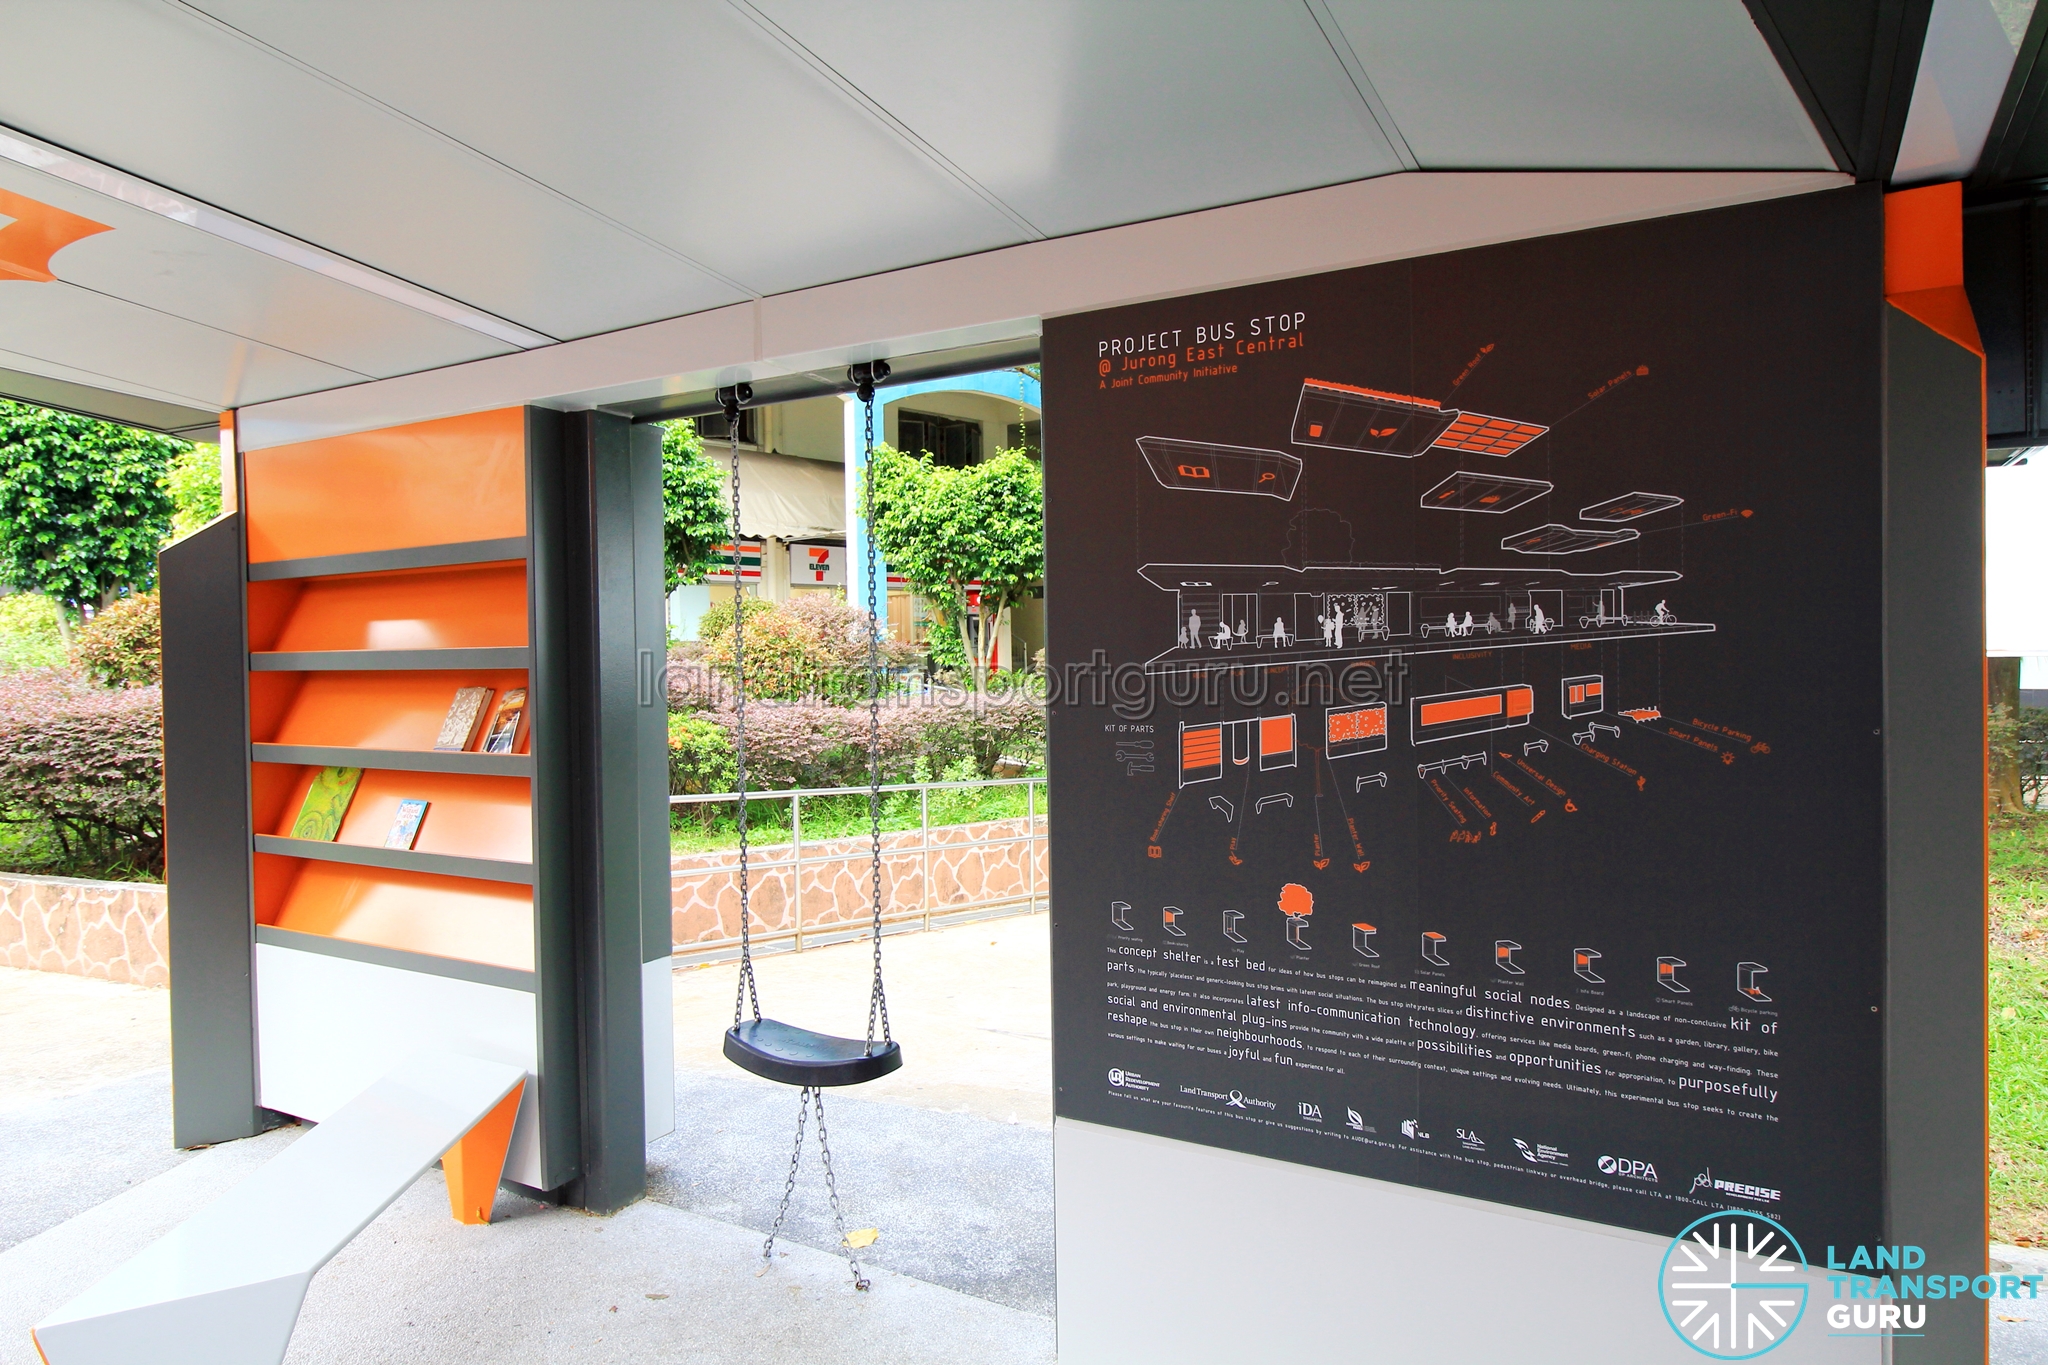 Project Bus Stop - Information Panel, swing and book shelf.